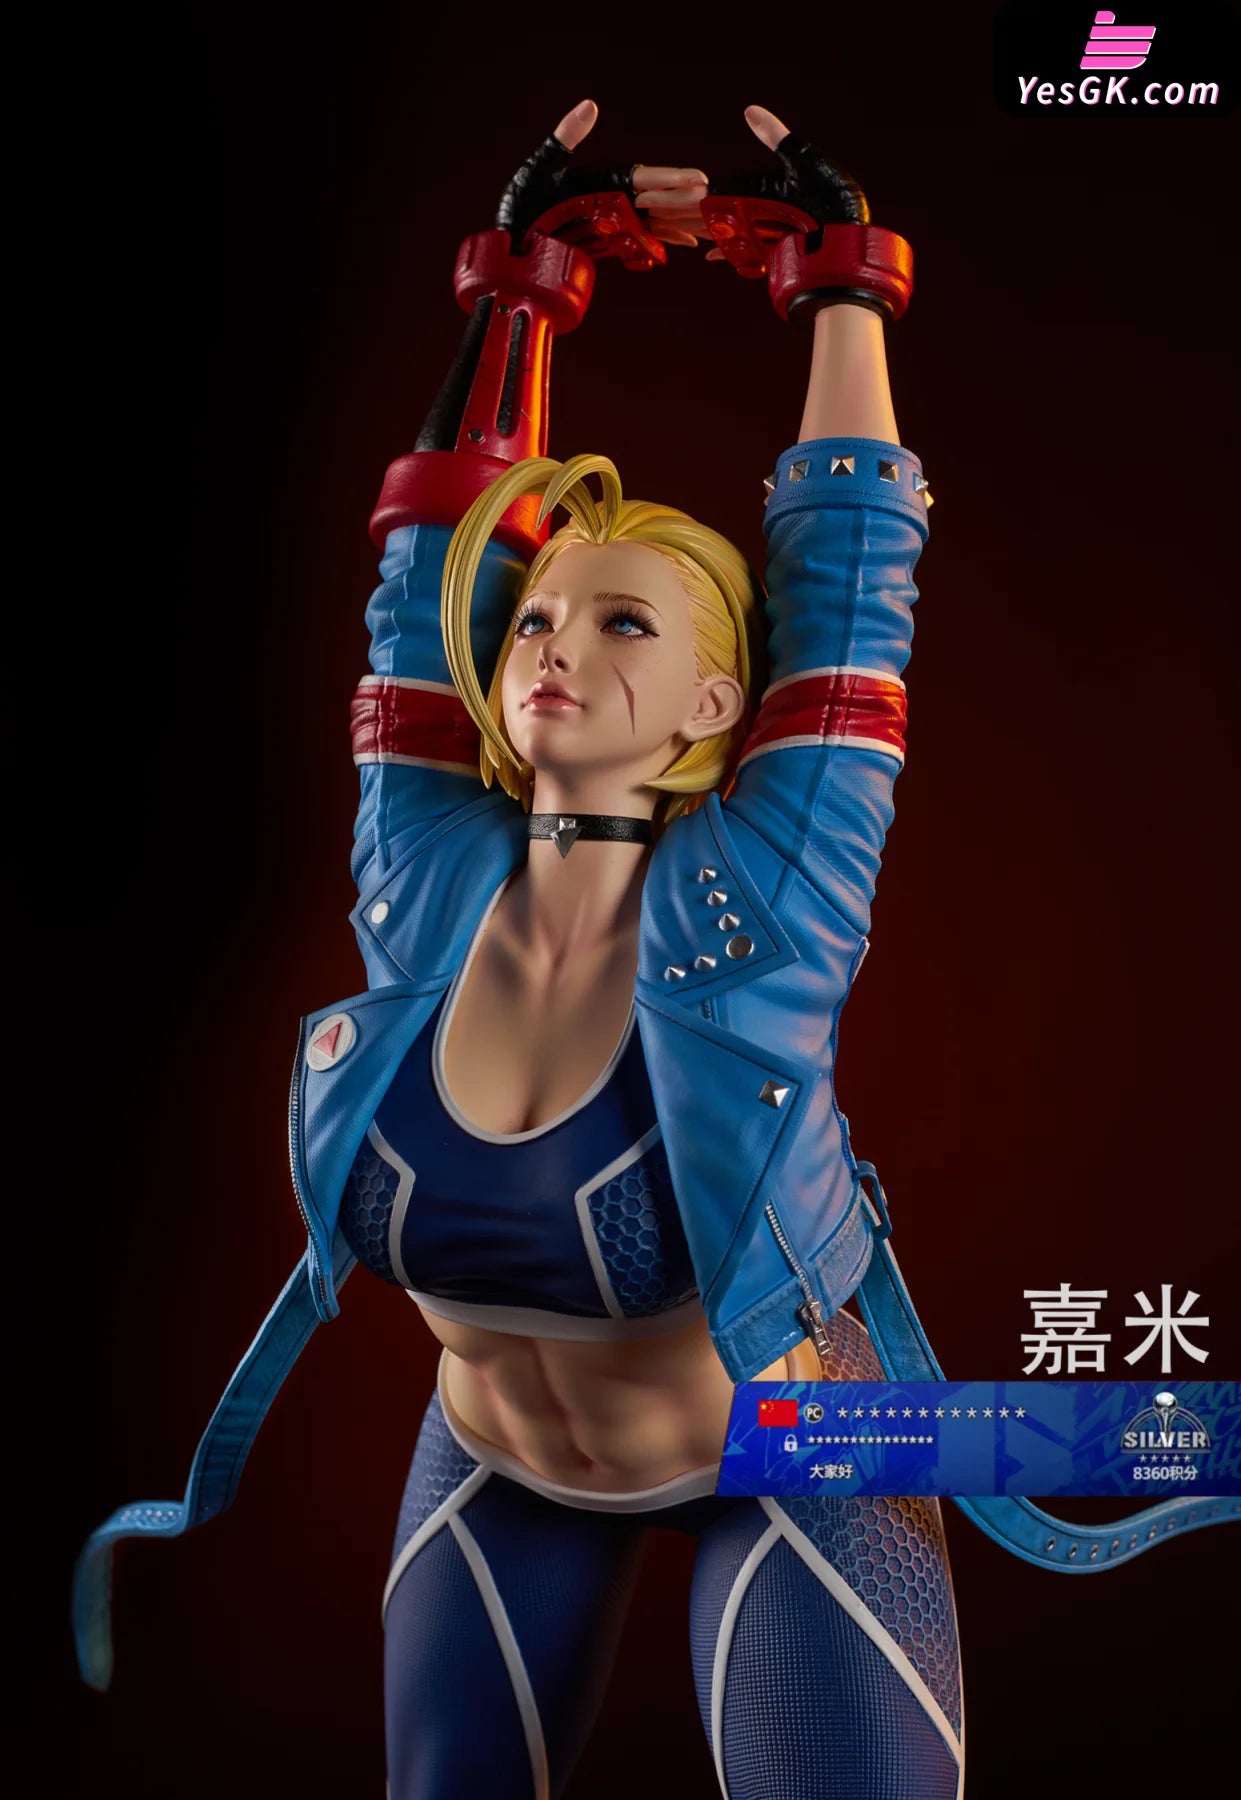 Dragon Ball & Street Fighter Ii: The World Warrior Killer Bee - Cammy Android 18 Statue Lazy Dog